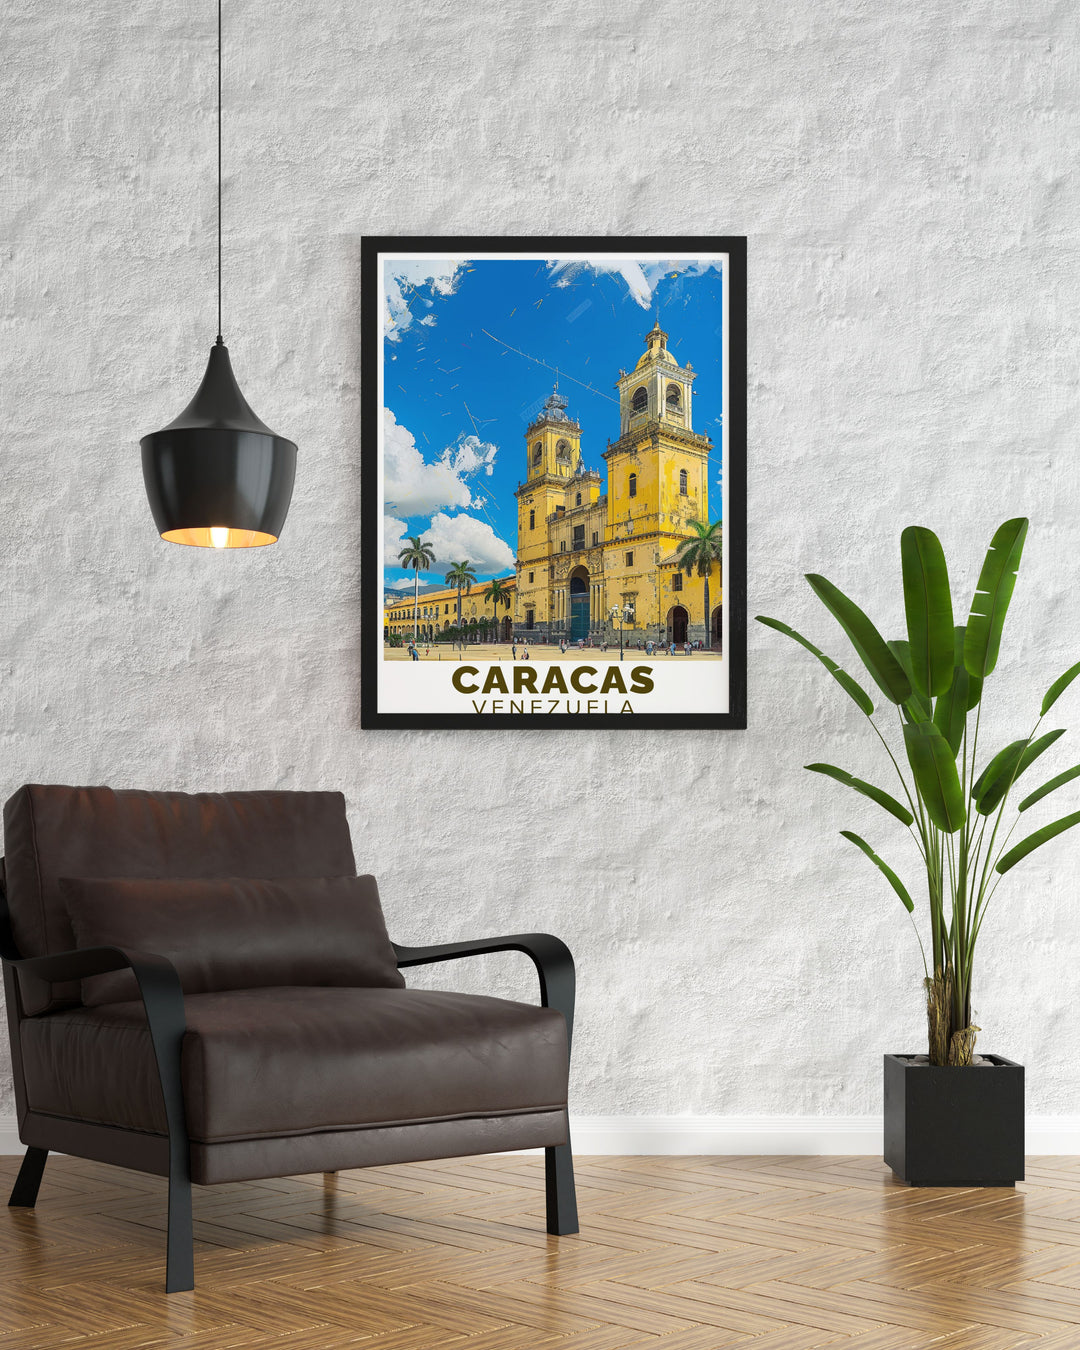 The picturesque scenery of Caracas with Plaza Bolivar as a focal point is featured in this vibrant travel poster, perfect for adding Venezuelas unique charm to your home.